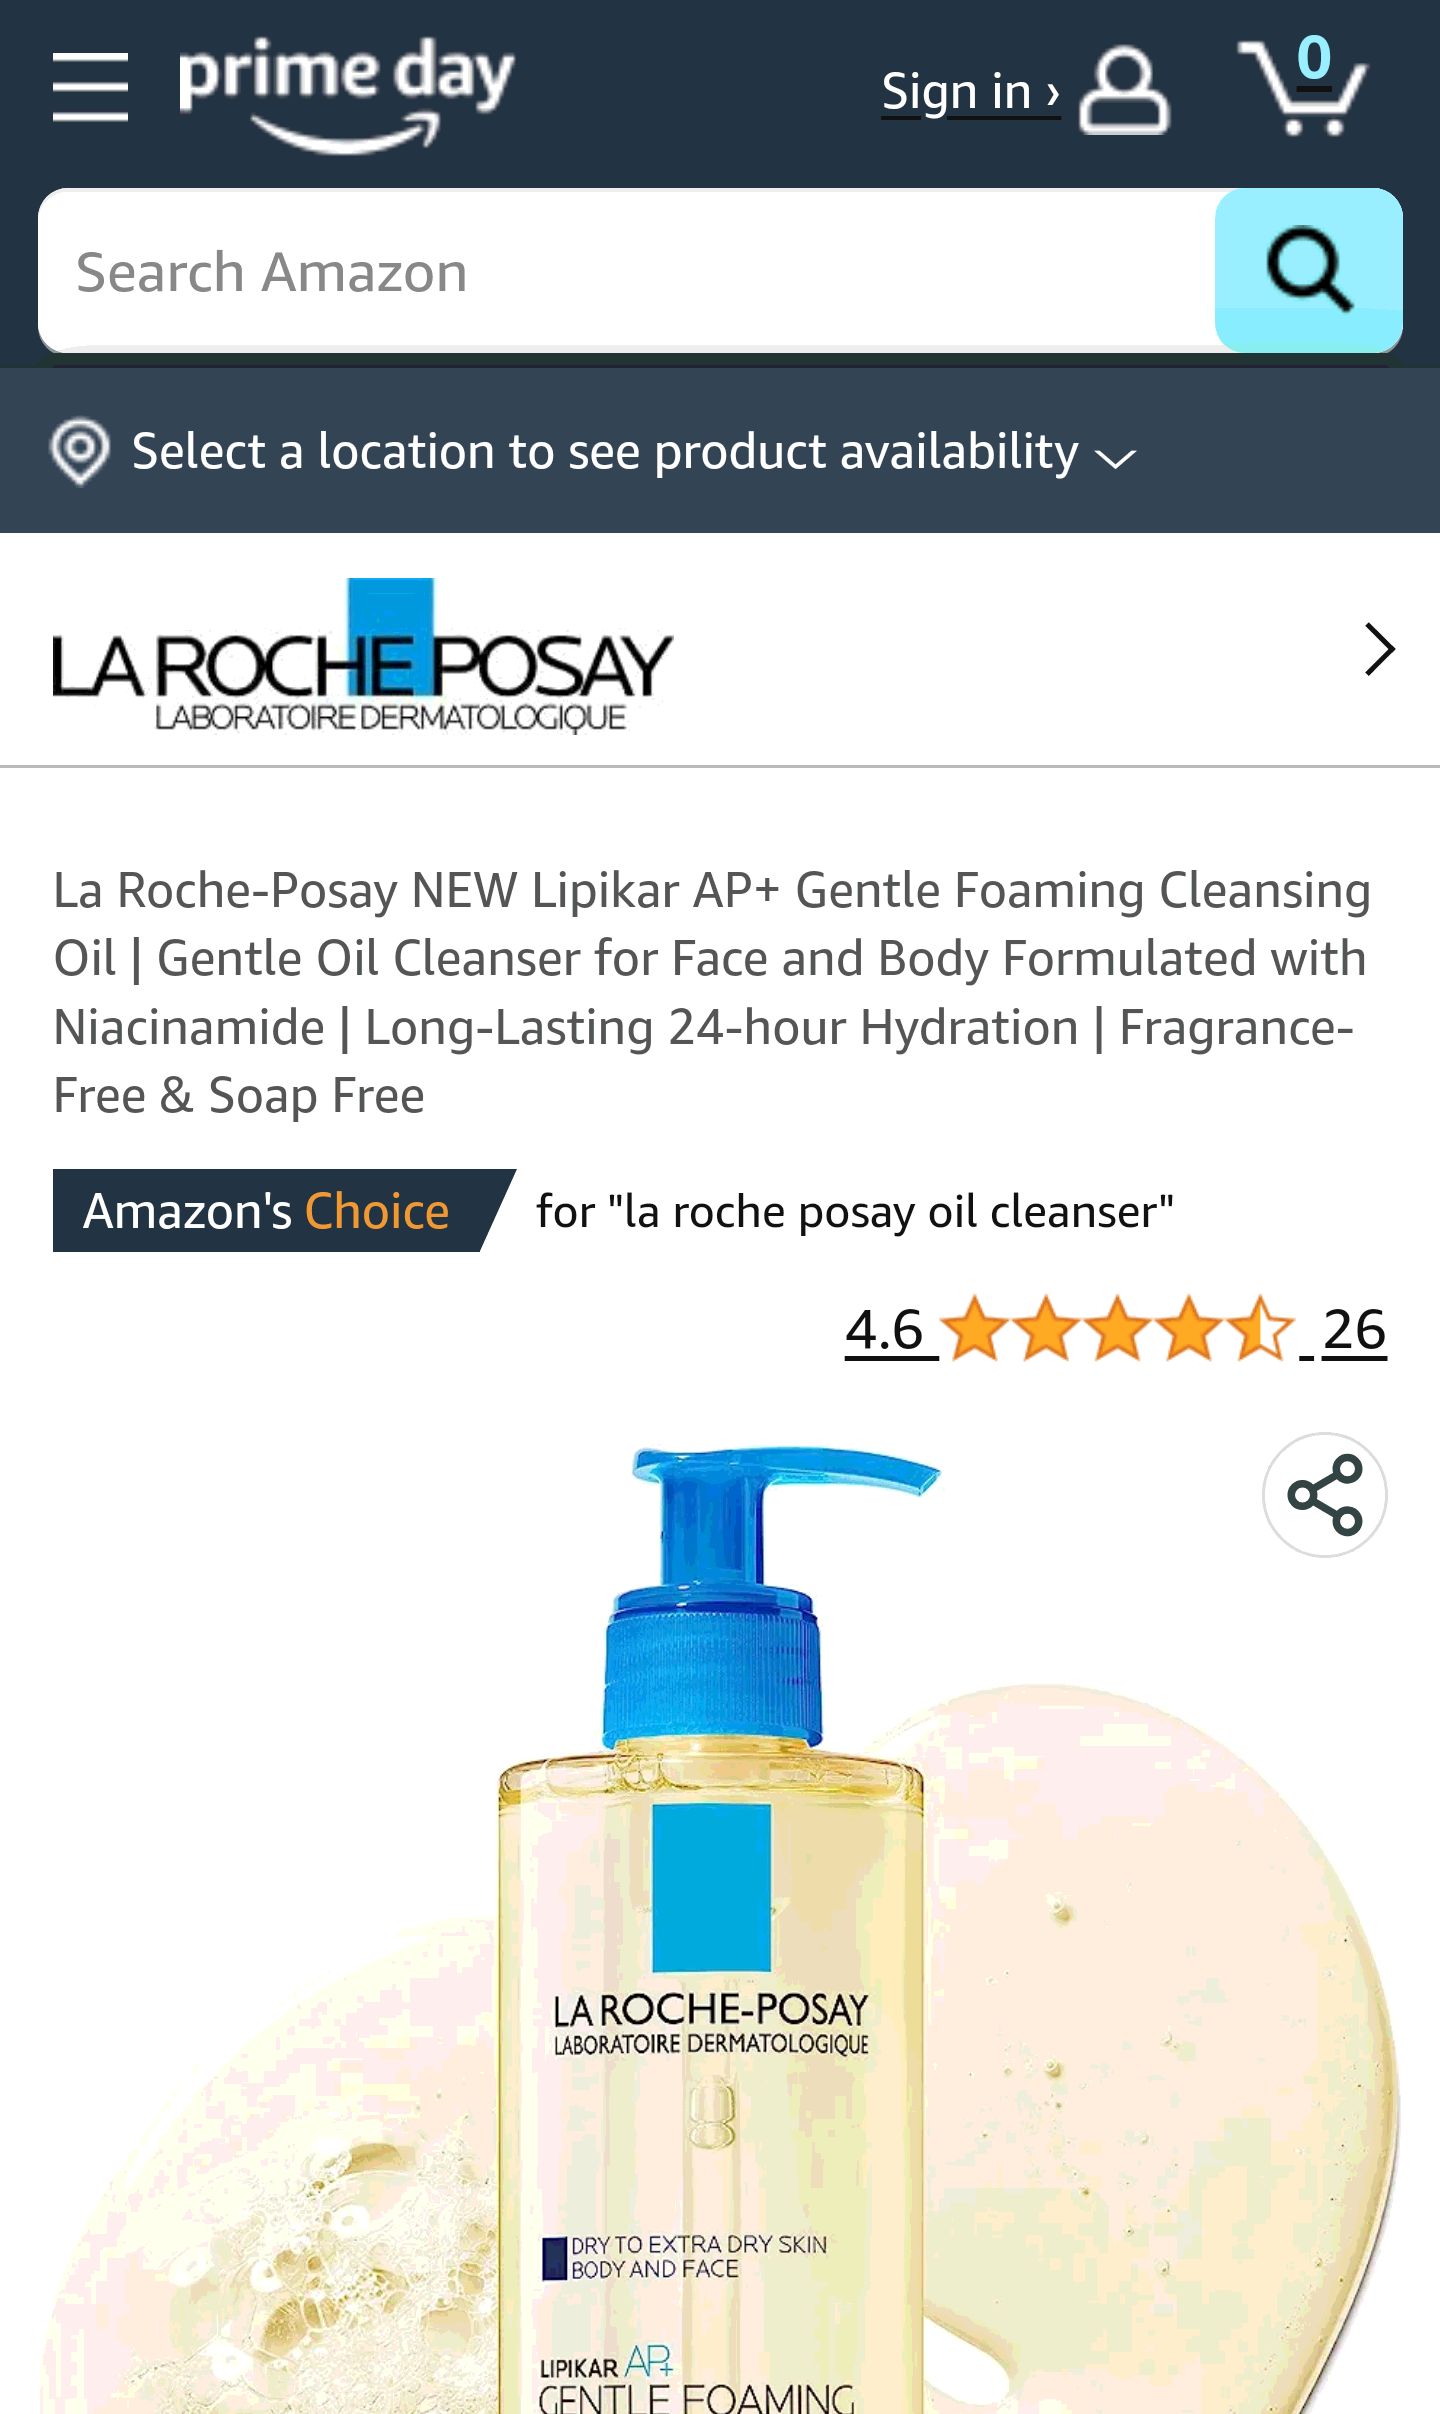 La Roche-Posay NEW Lipikar AP+ Gentle Foaming Cleansing Oil | Gentle Oil Cleanser for Face and Body Formulated with Niacinamide | Long-Lasting 24-hour Hydration | Fragrance-Free & Soap Free : Beauty & Personal Care